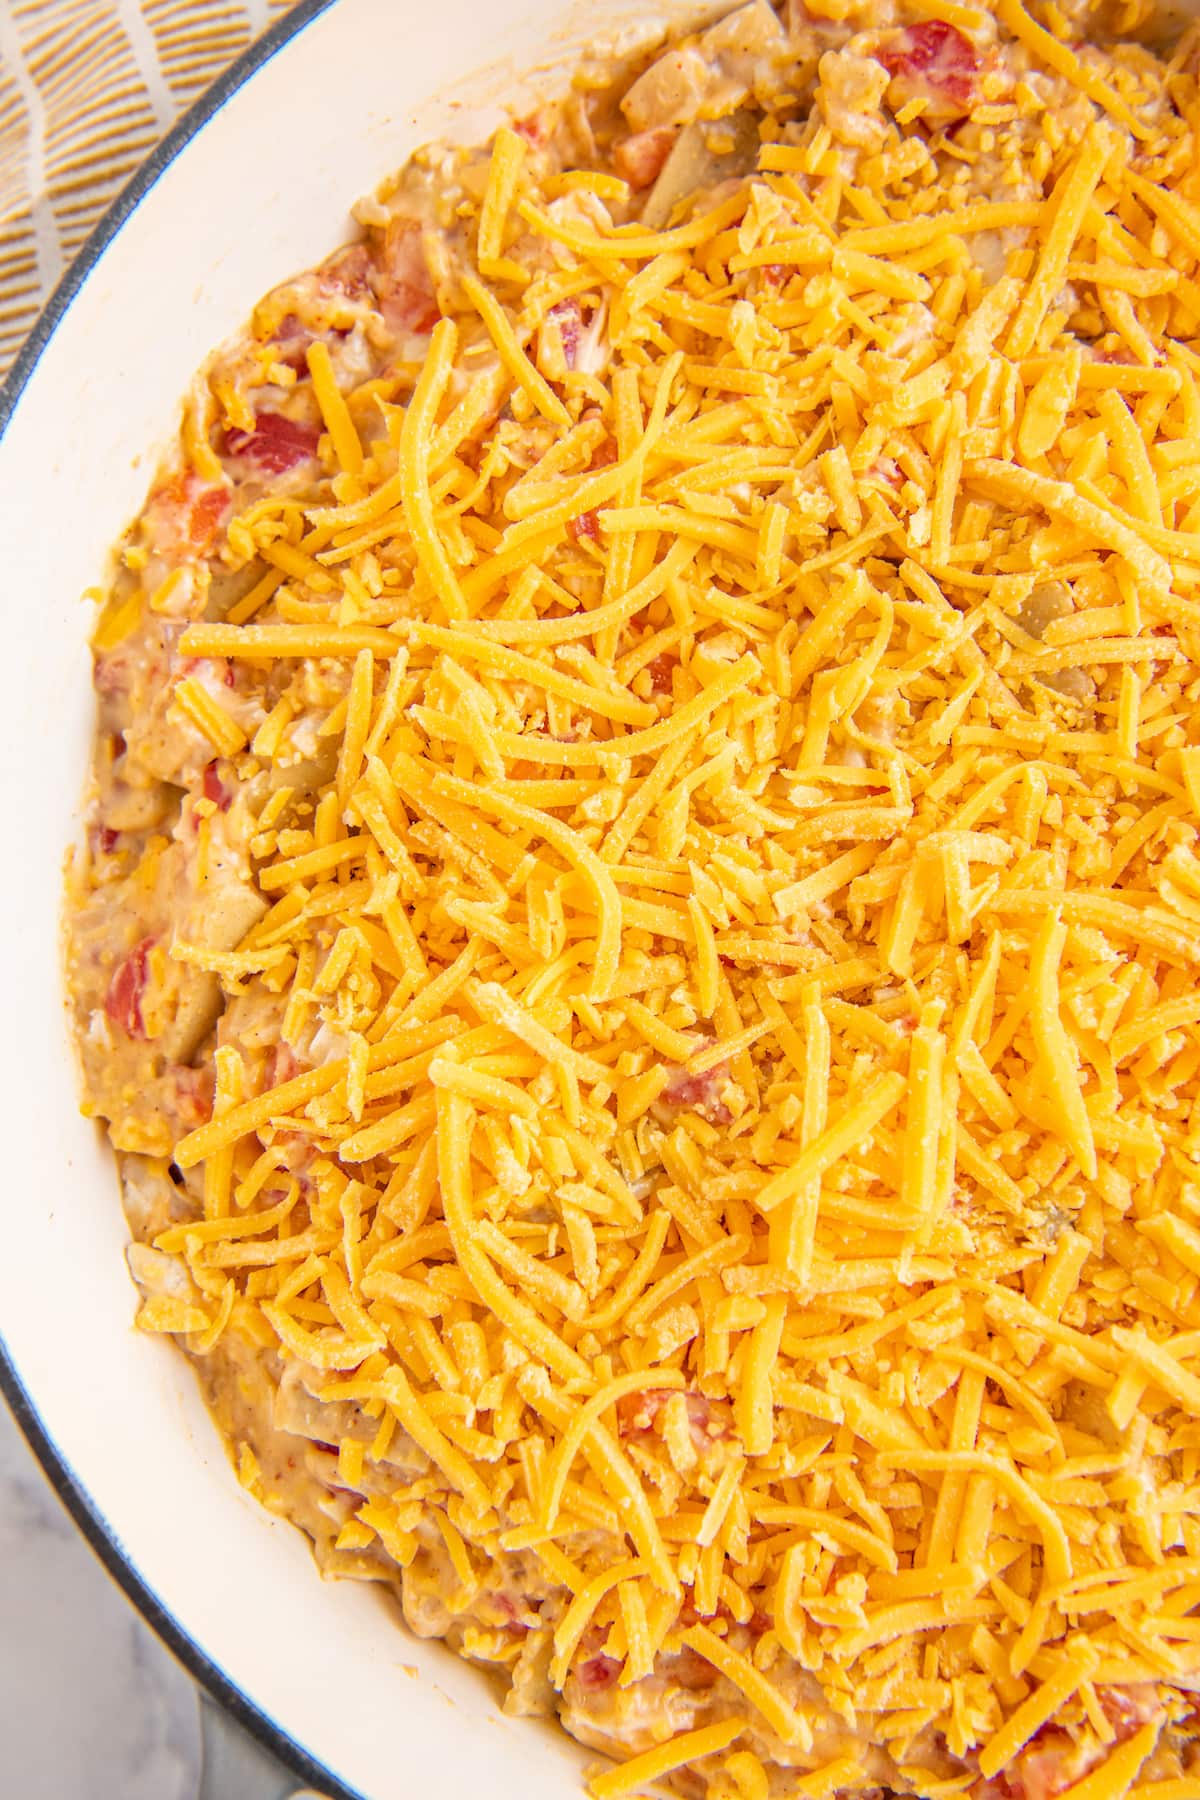 a platter with a chicken casserole and shredded cheese on top